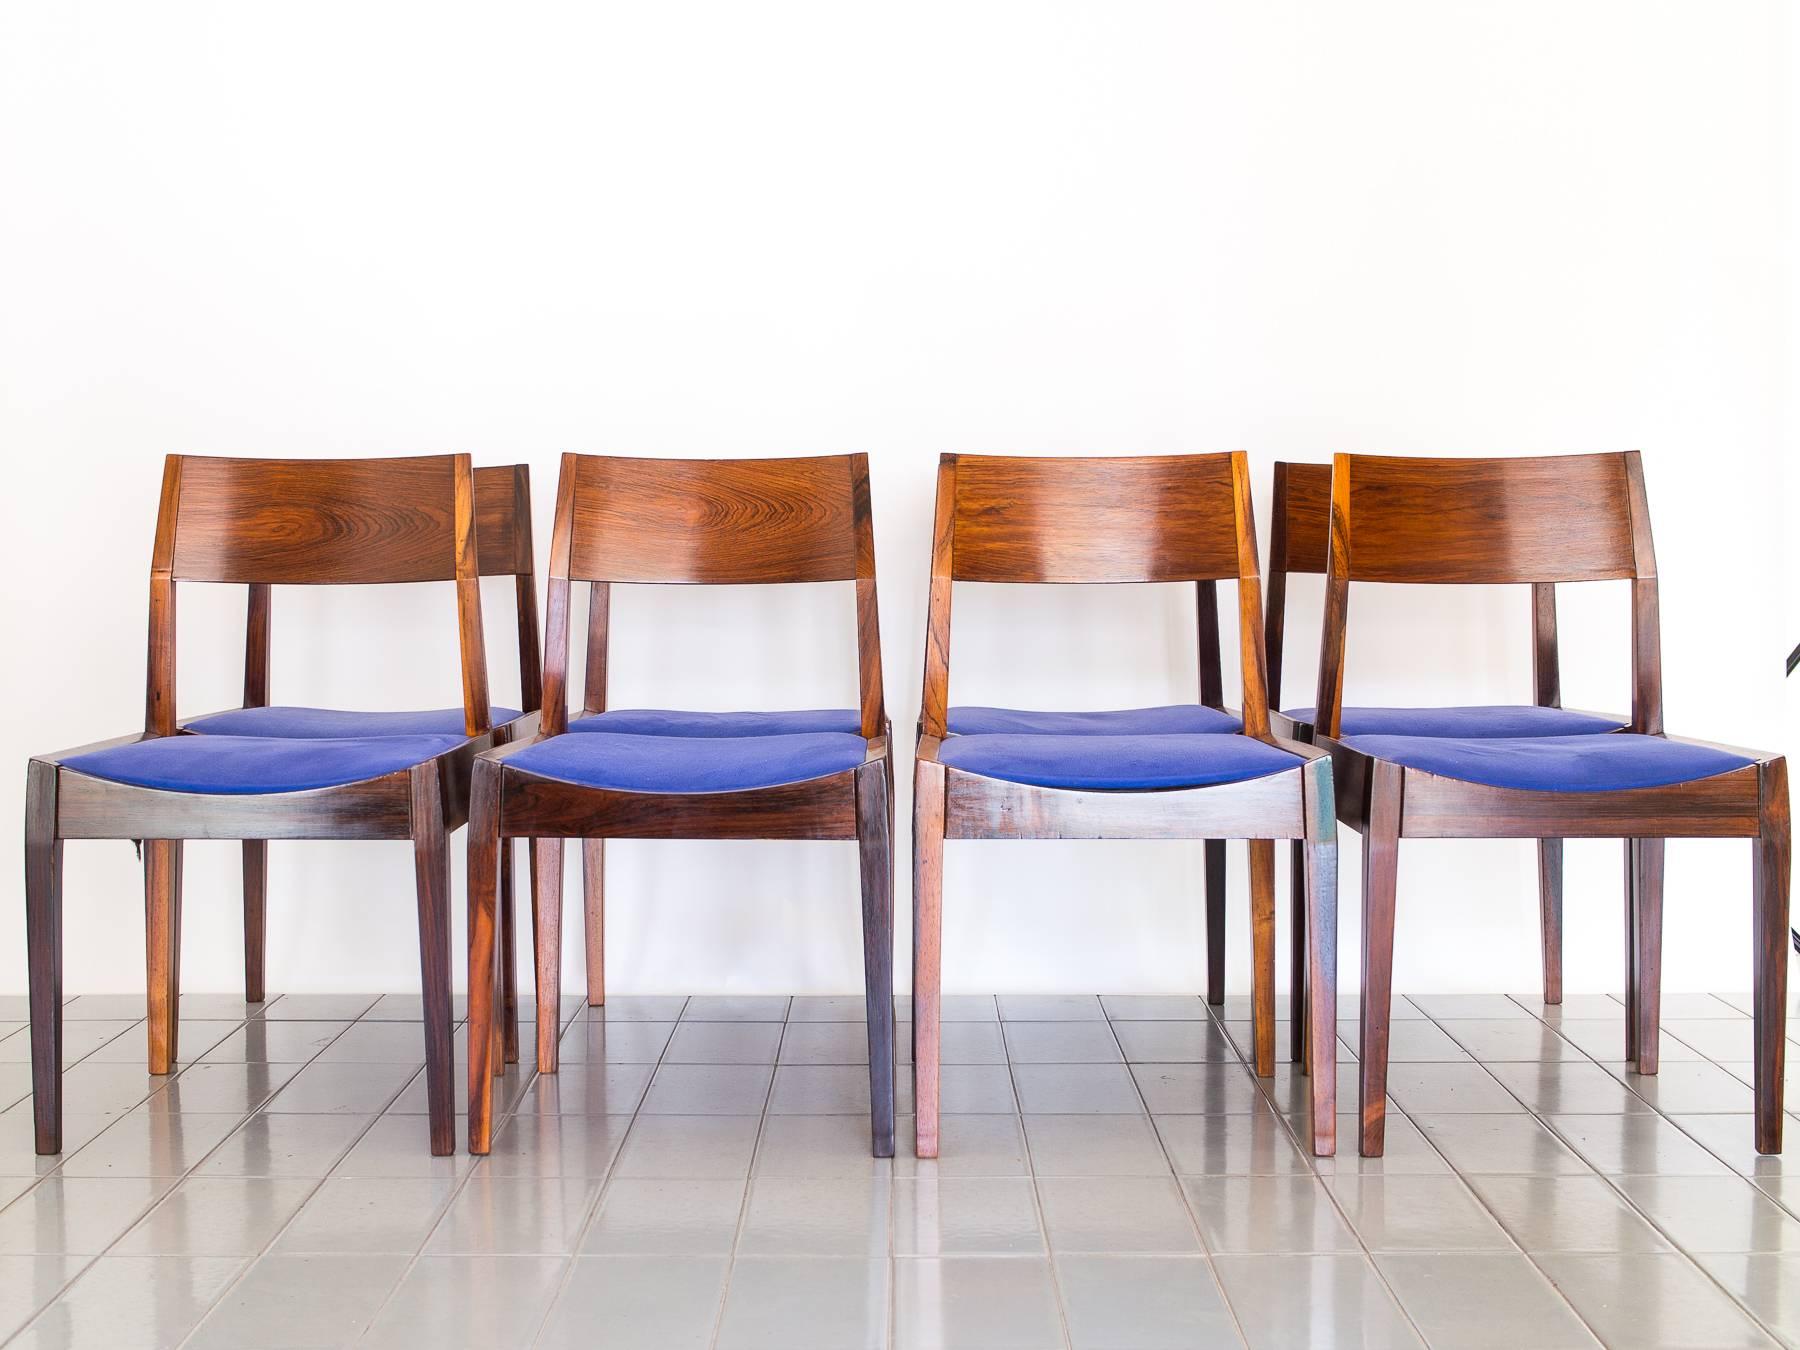 1960s Set of Ten Rosewood Dining Chairs by Italo Bianchi, Brazilian Modernism 5